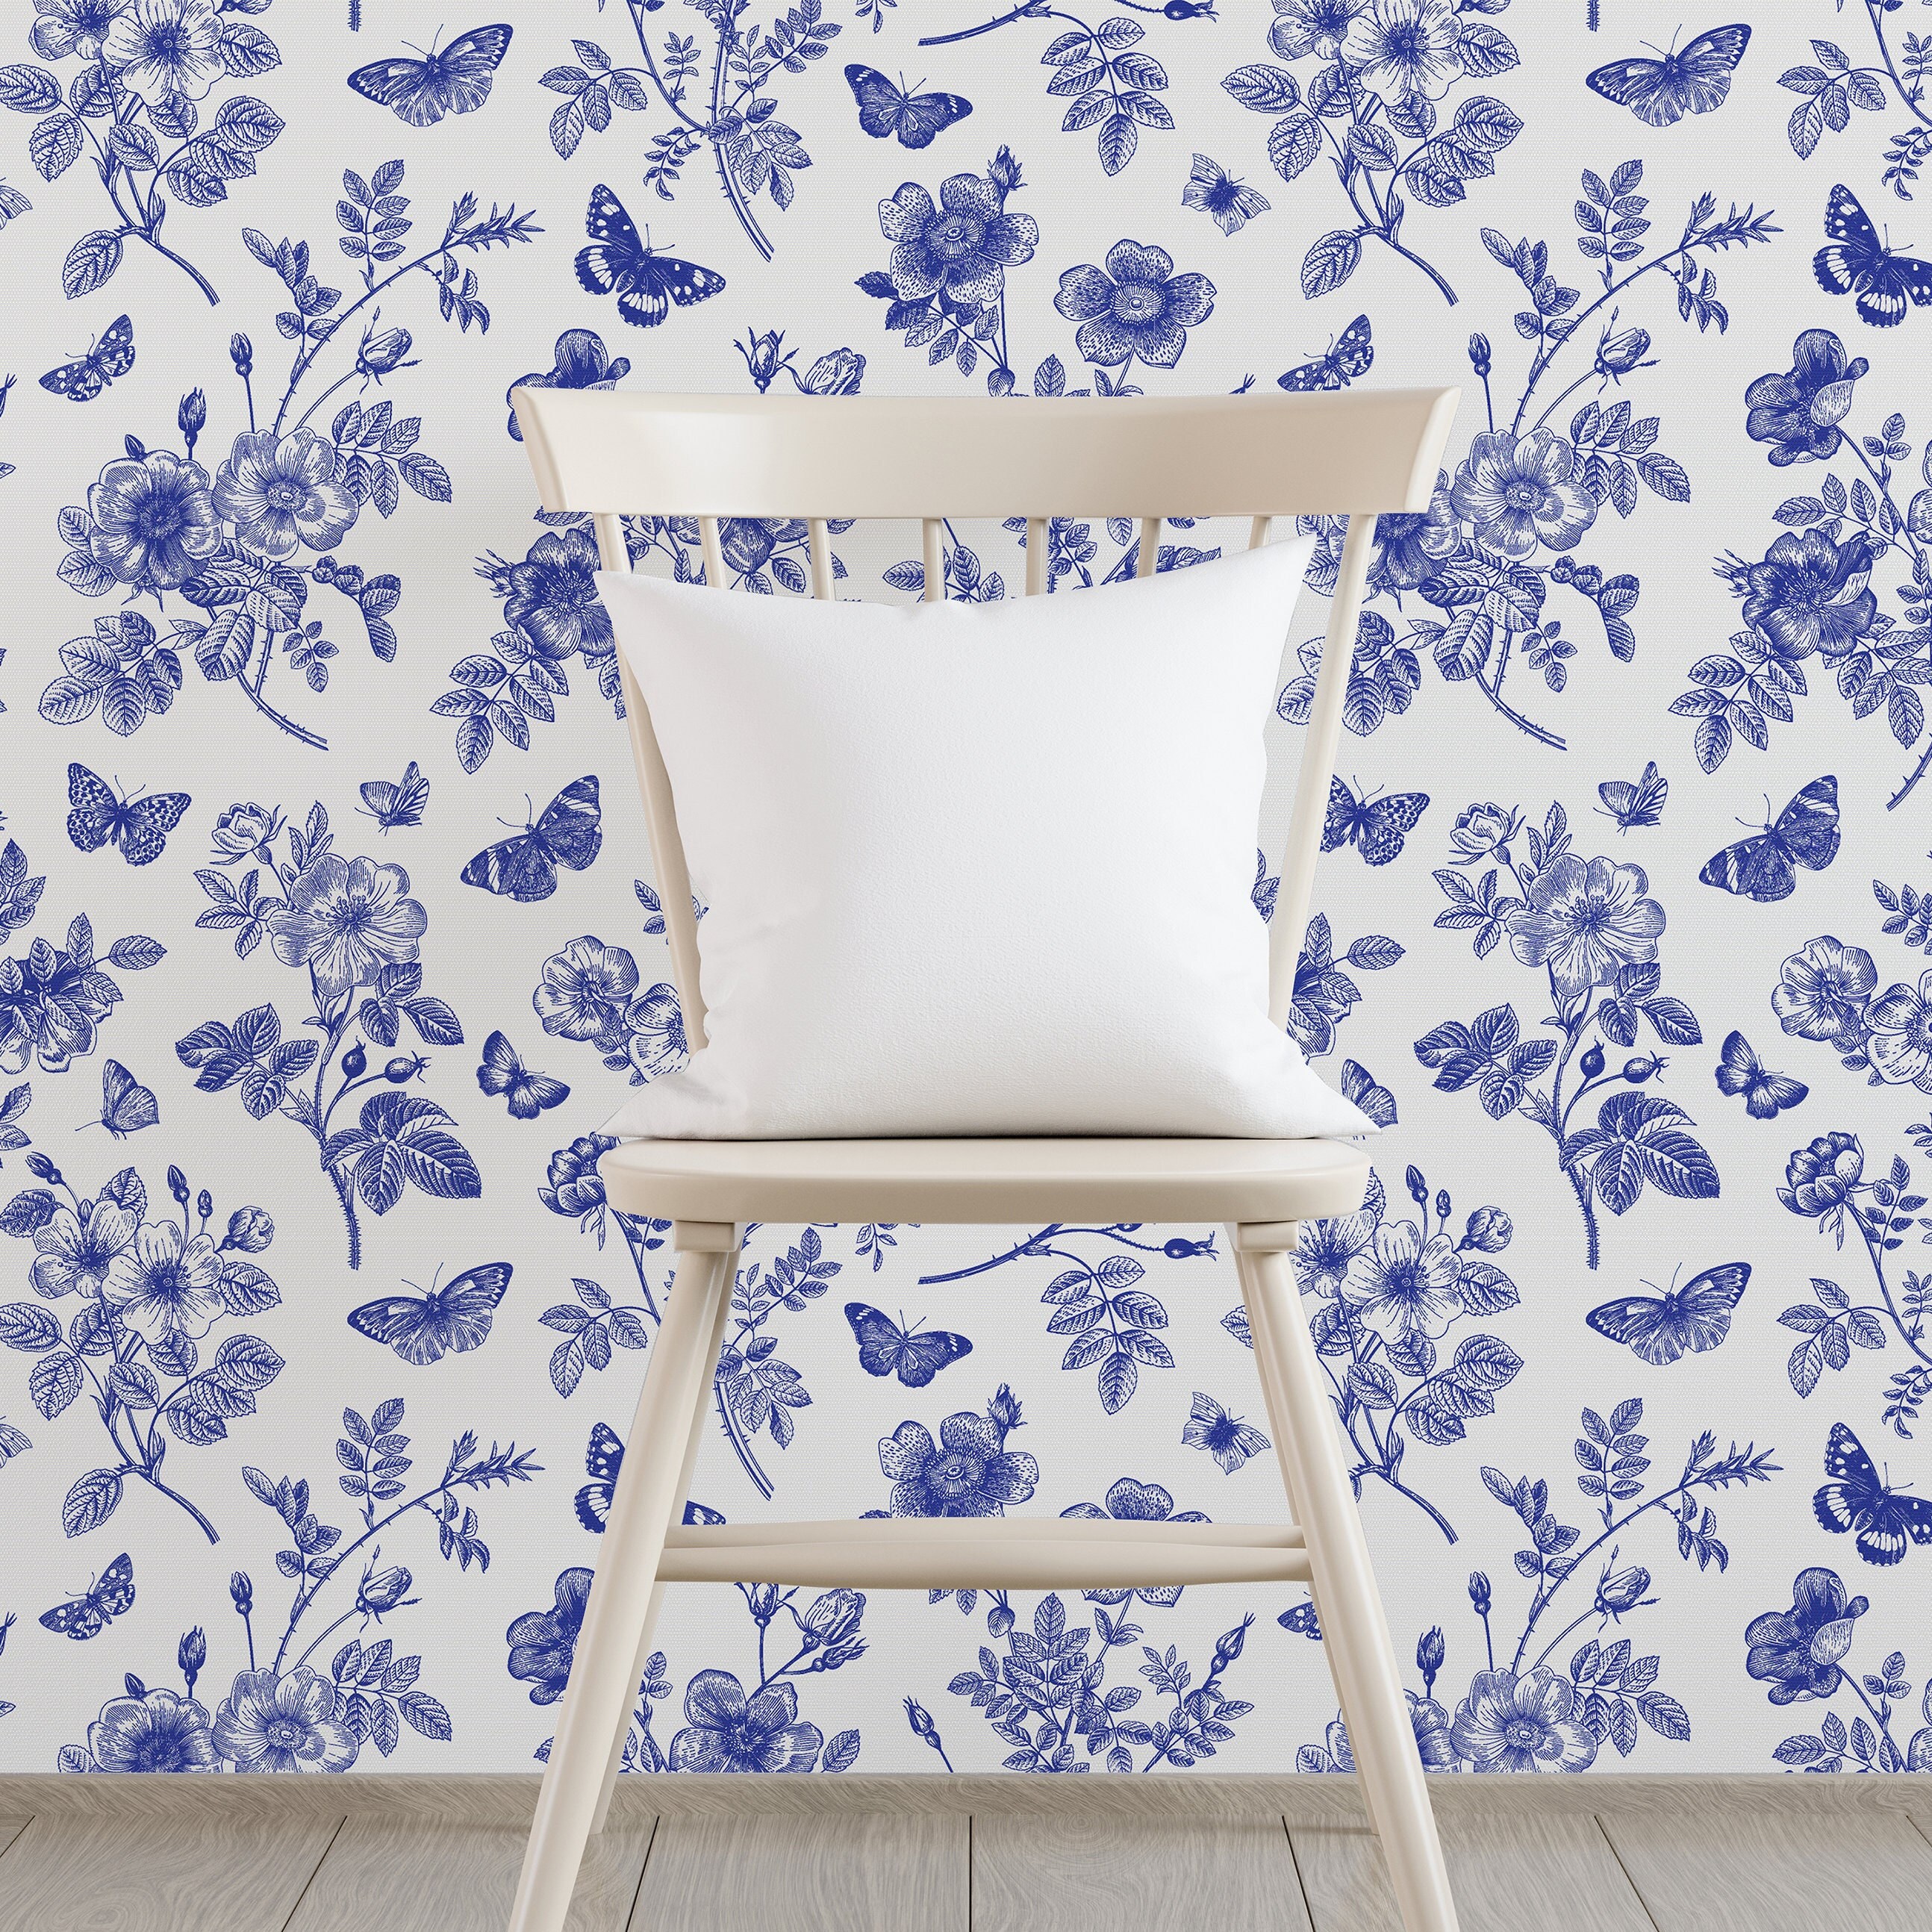 Buy French Wallpaper Online on Ubuy India at Best Prices